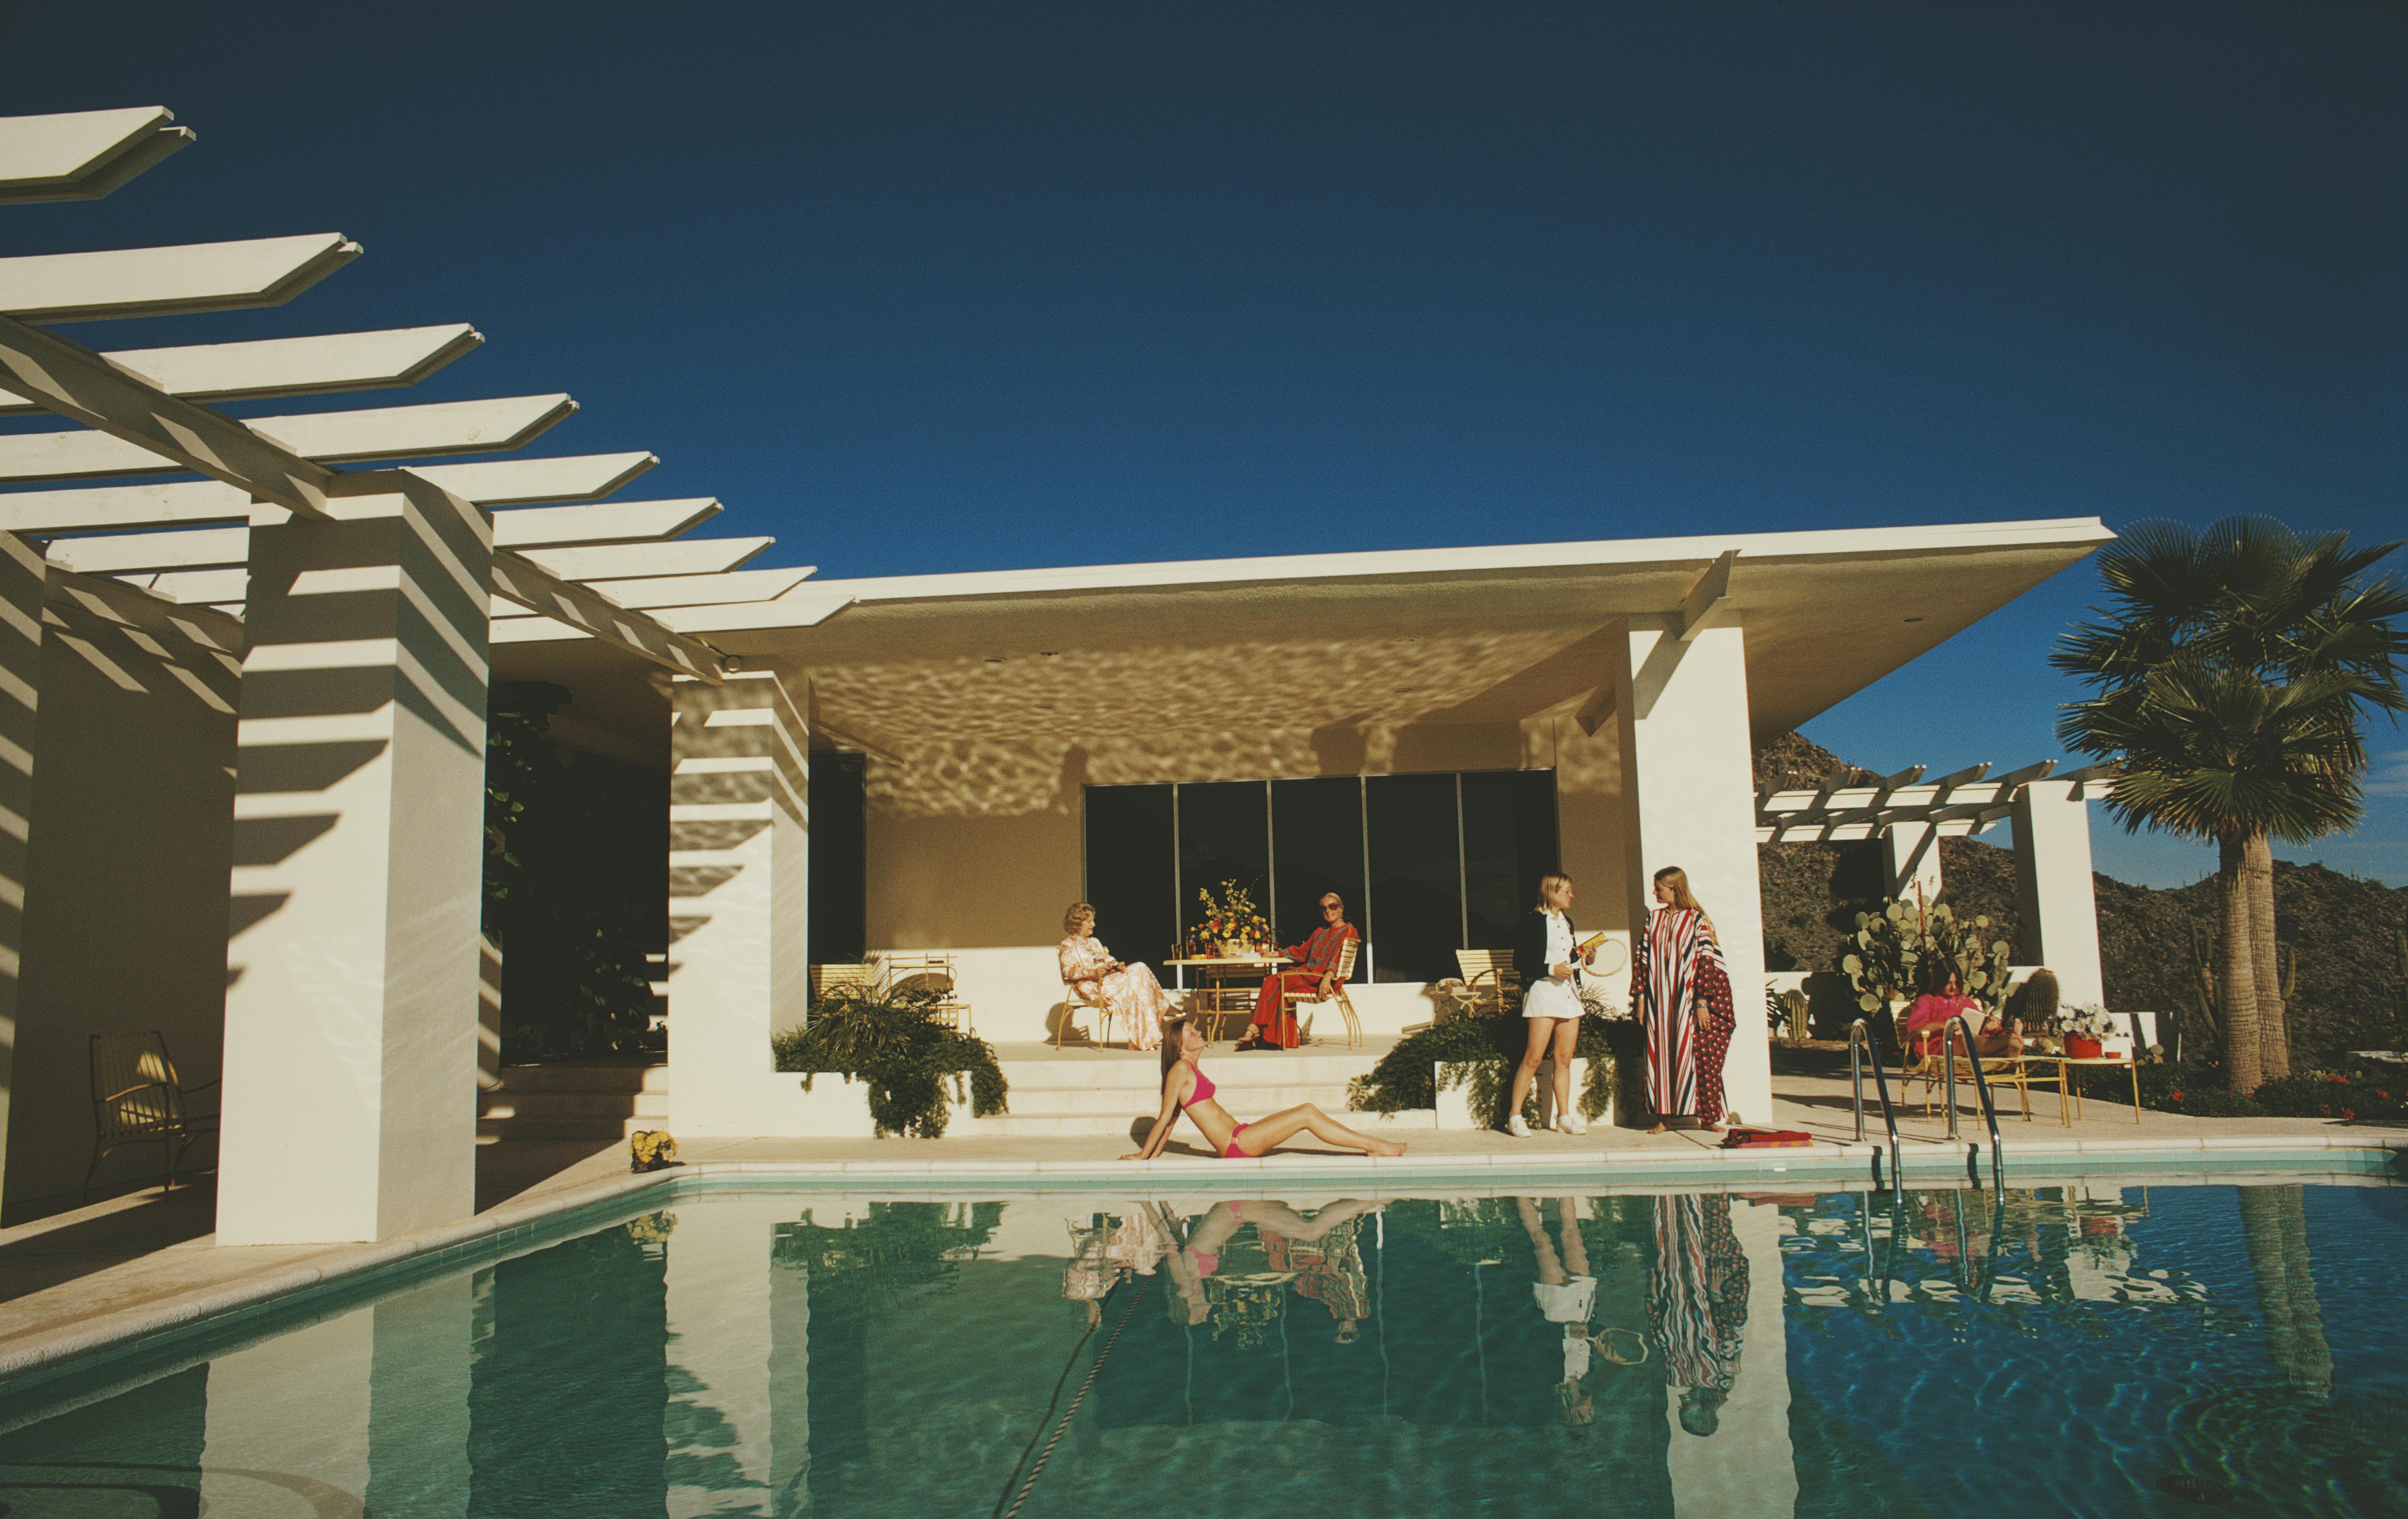 Slim Aarons
Poolside in Arizona
1973. (printed later)
C print 
Estate stamped and numbered edition of 150 
with Certificate of authenticity

Guests by the pool at the home of Wayne Beal in Scottsdale, Arizona, January 1973.

Slim Aarons (1916-2006)